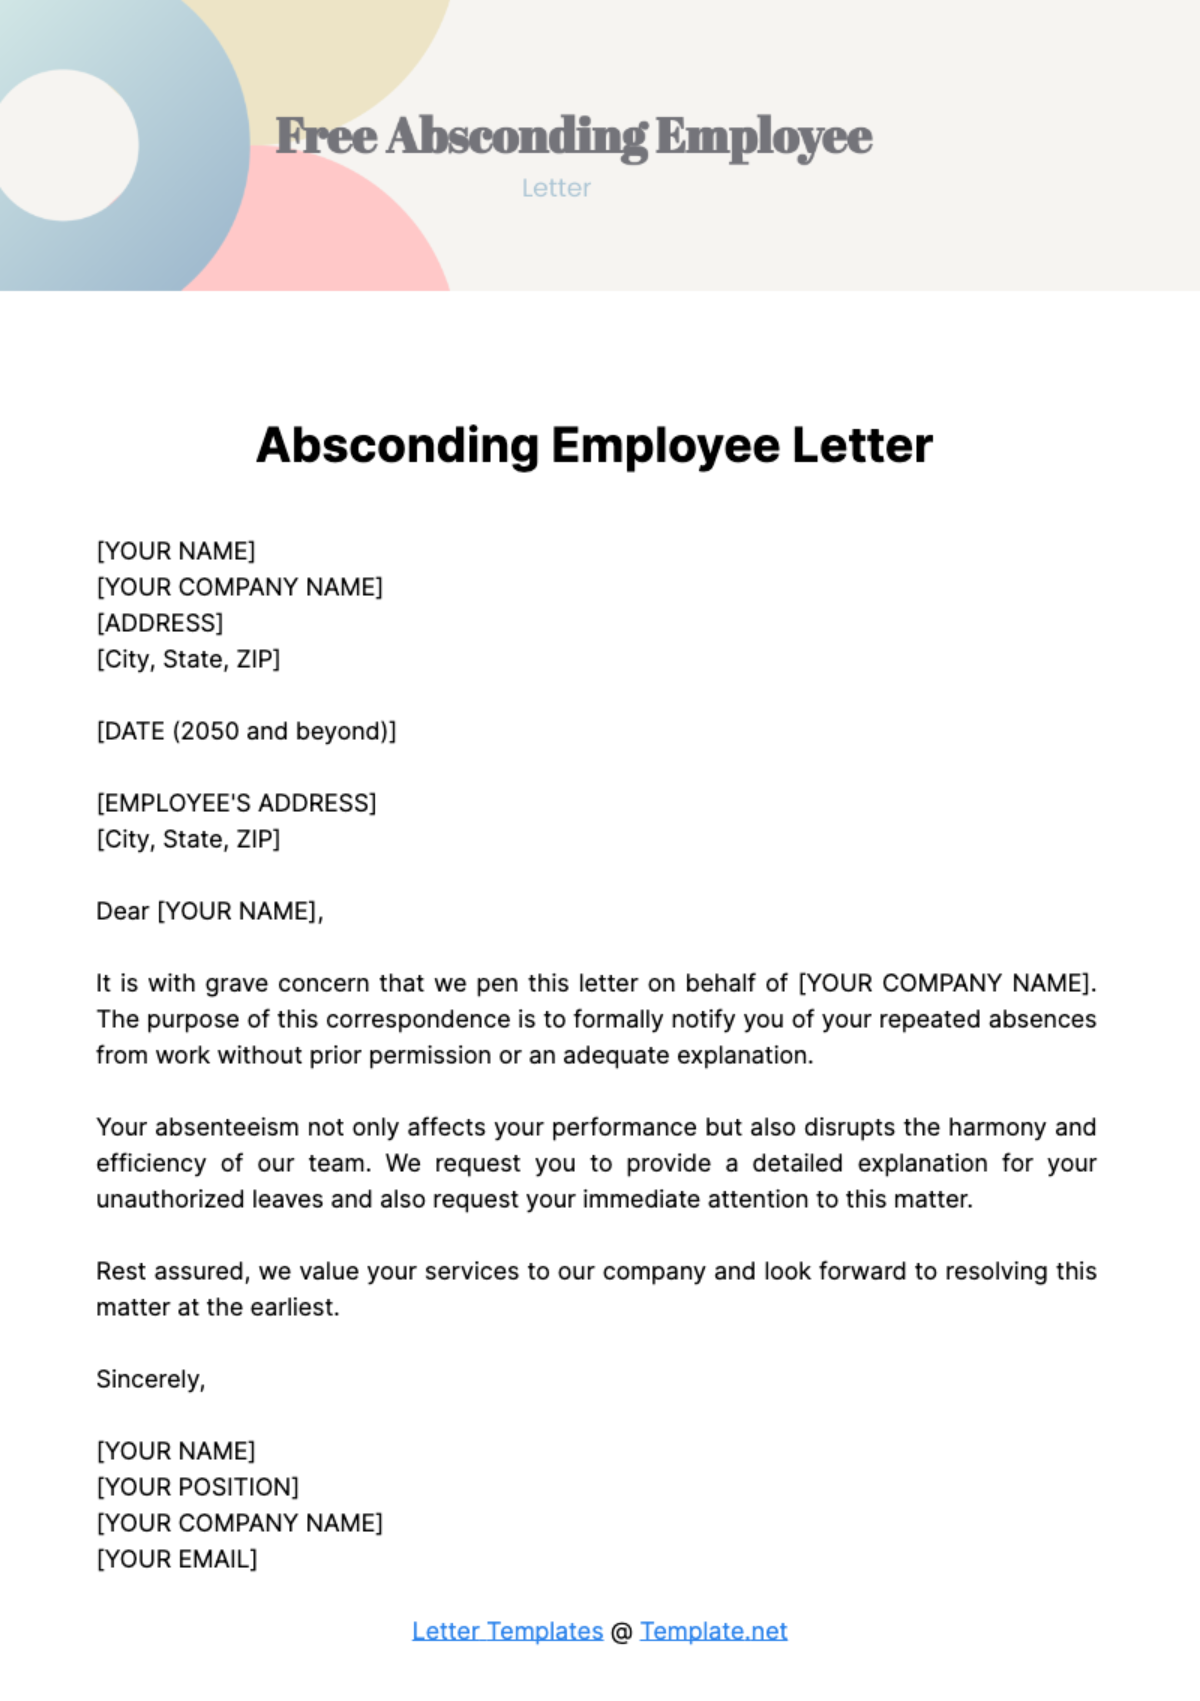 Free Absconding Employee Letter Template